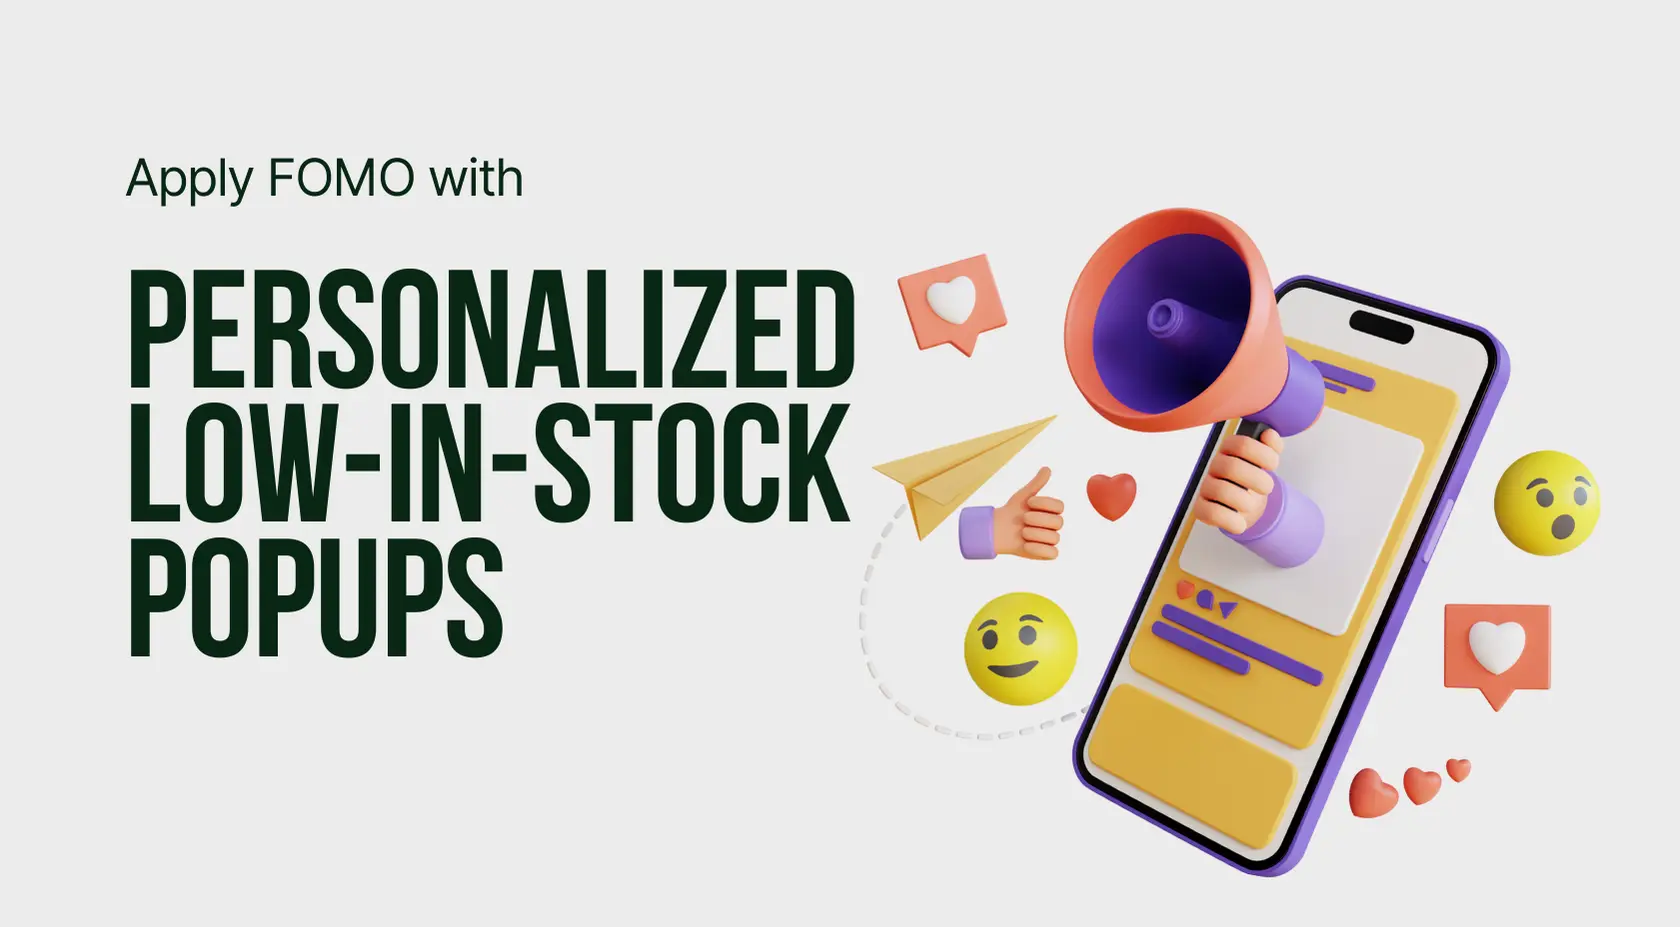 Apply FOMO with Personalized Low-in-Stock Popups & Maximize Your Sales